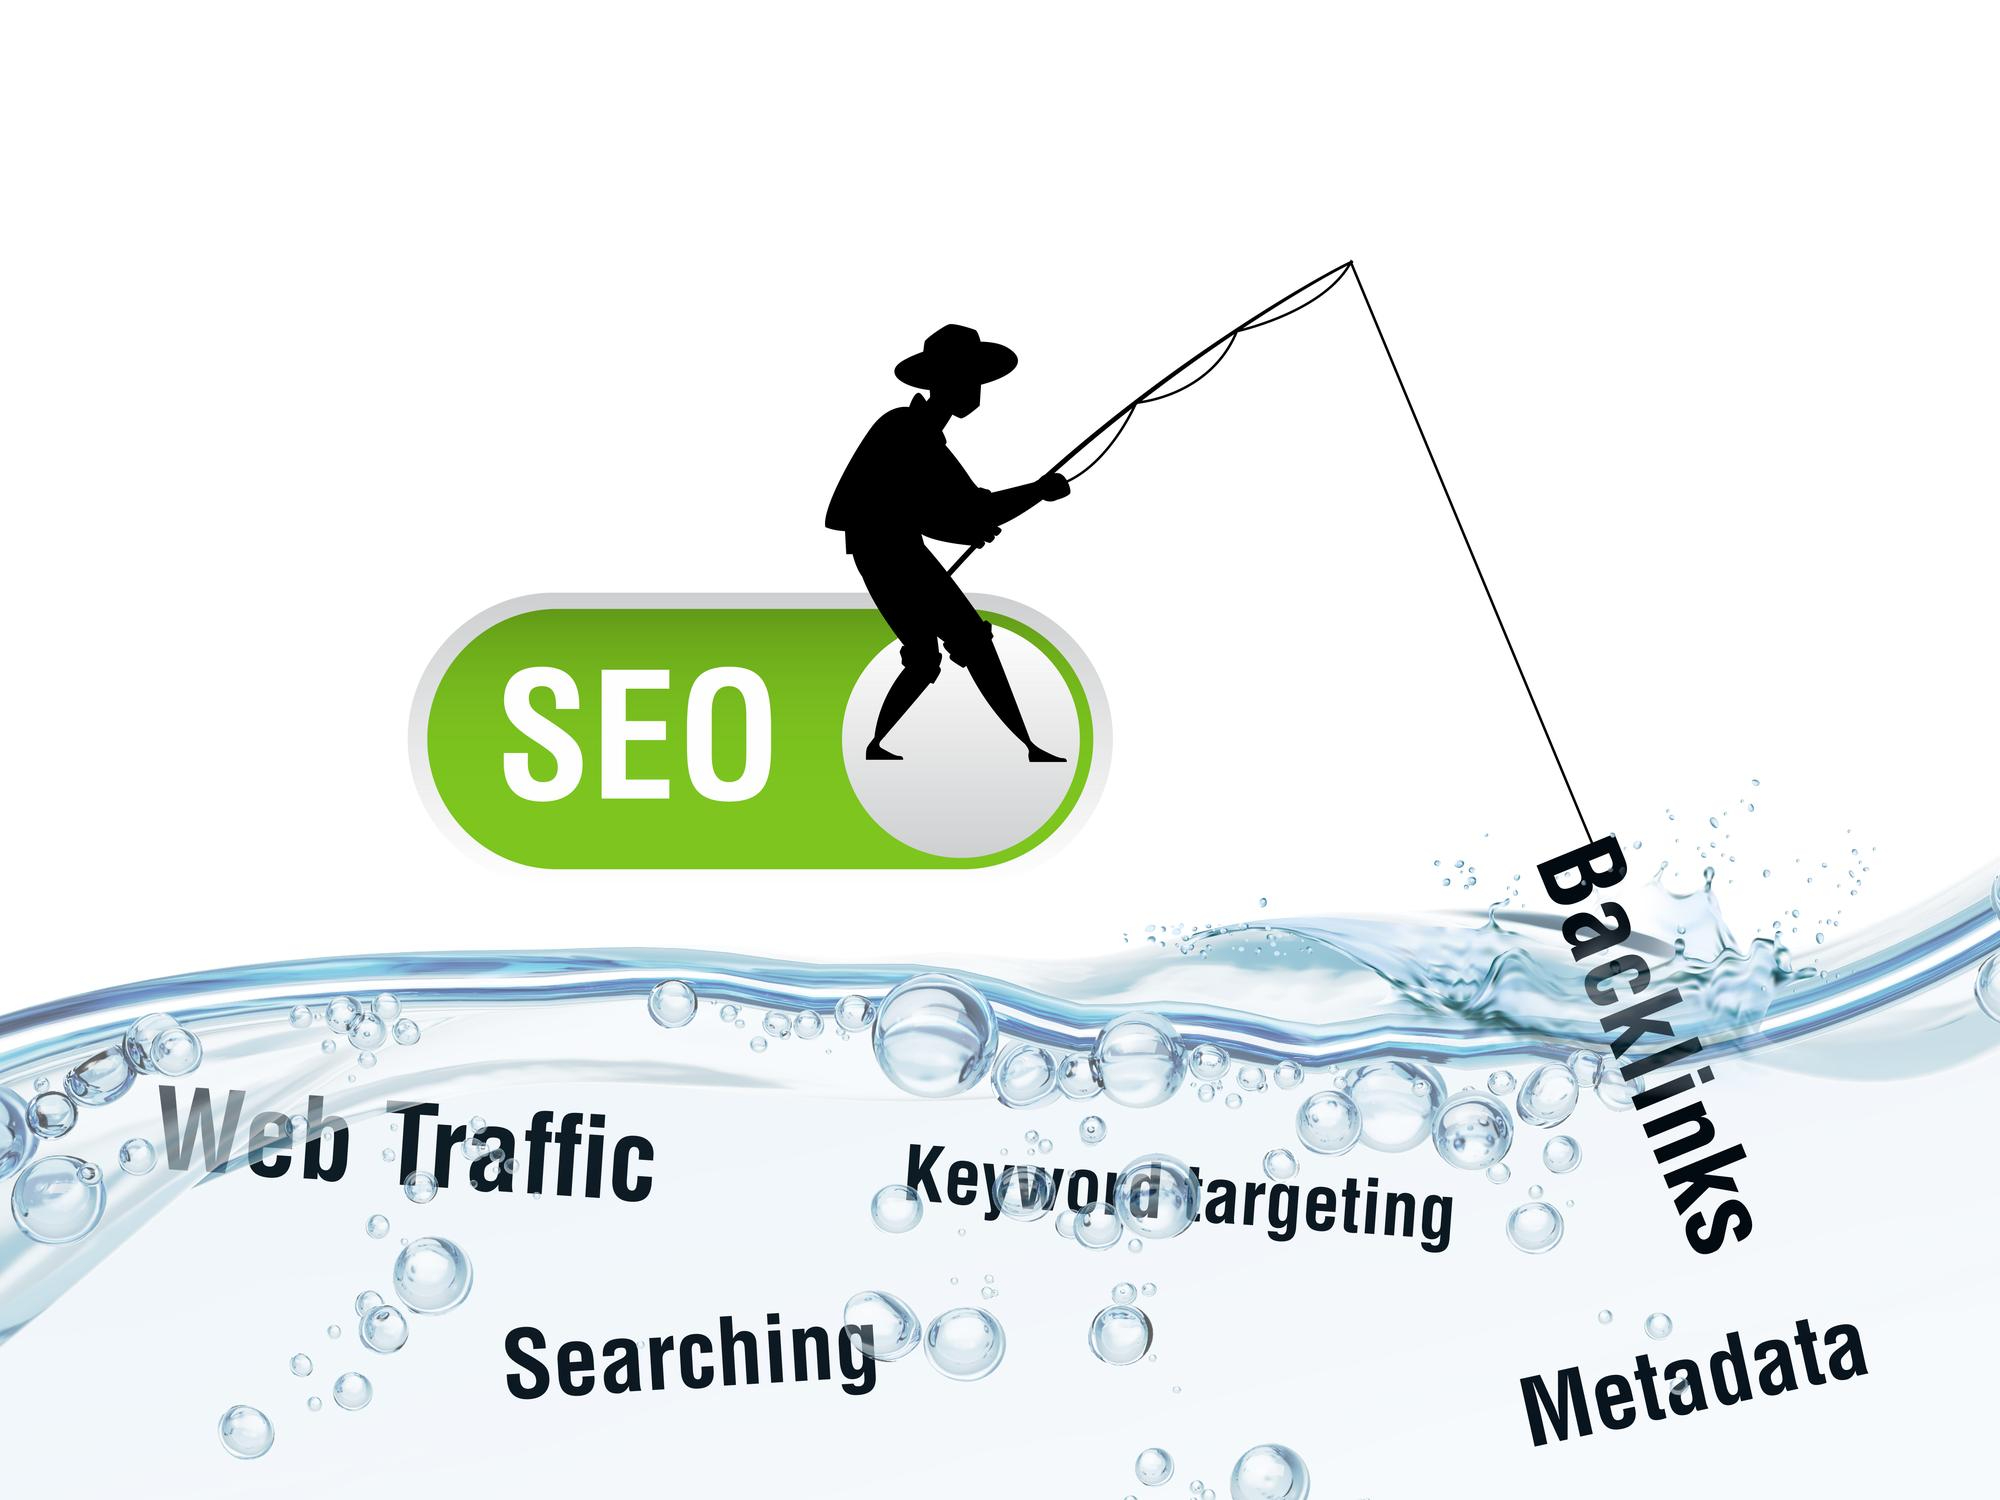 Optimize your blog for seo